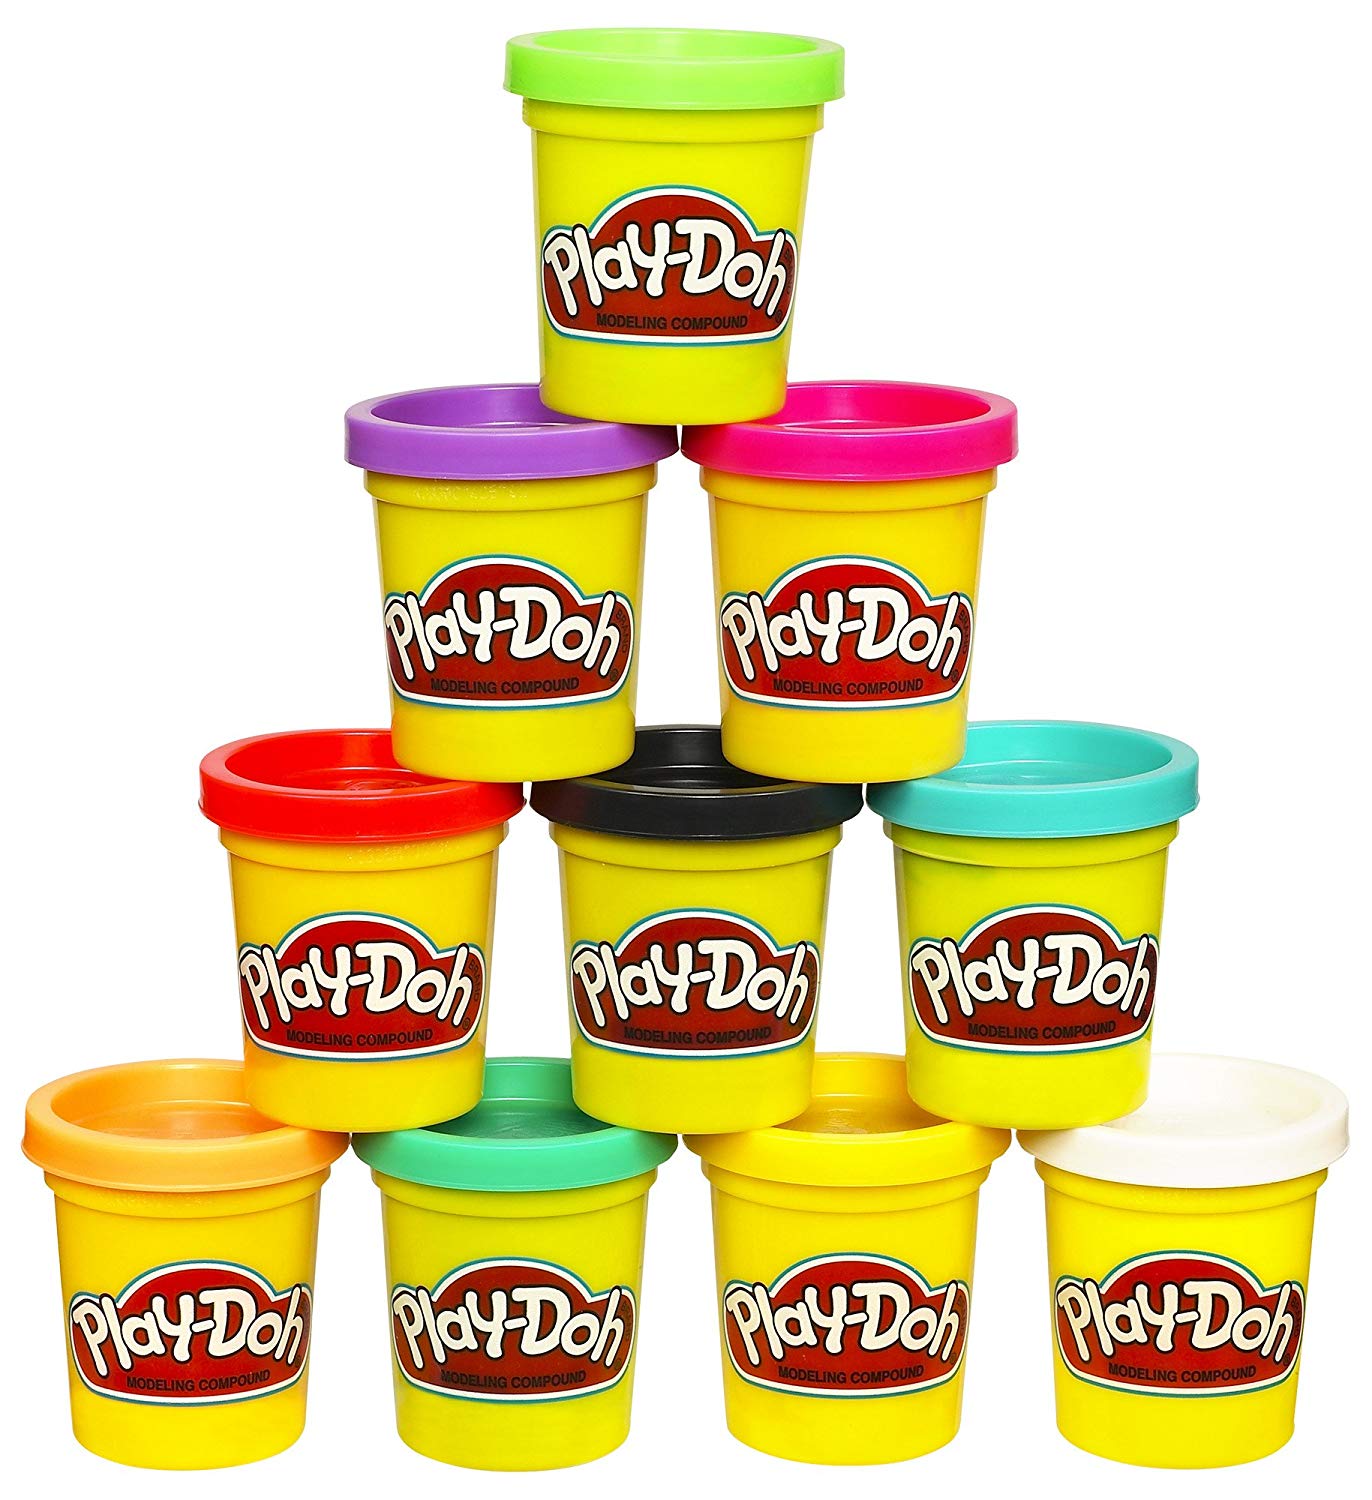 Set of colorful Play-Doh.